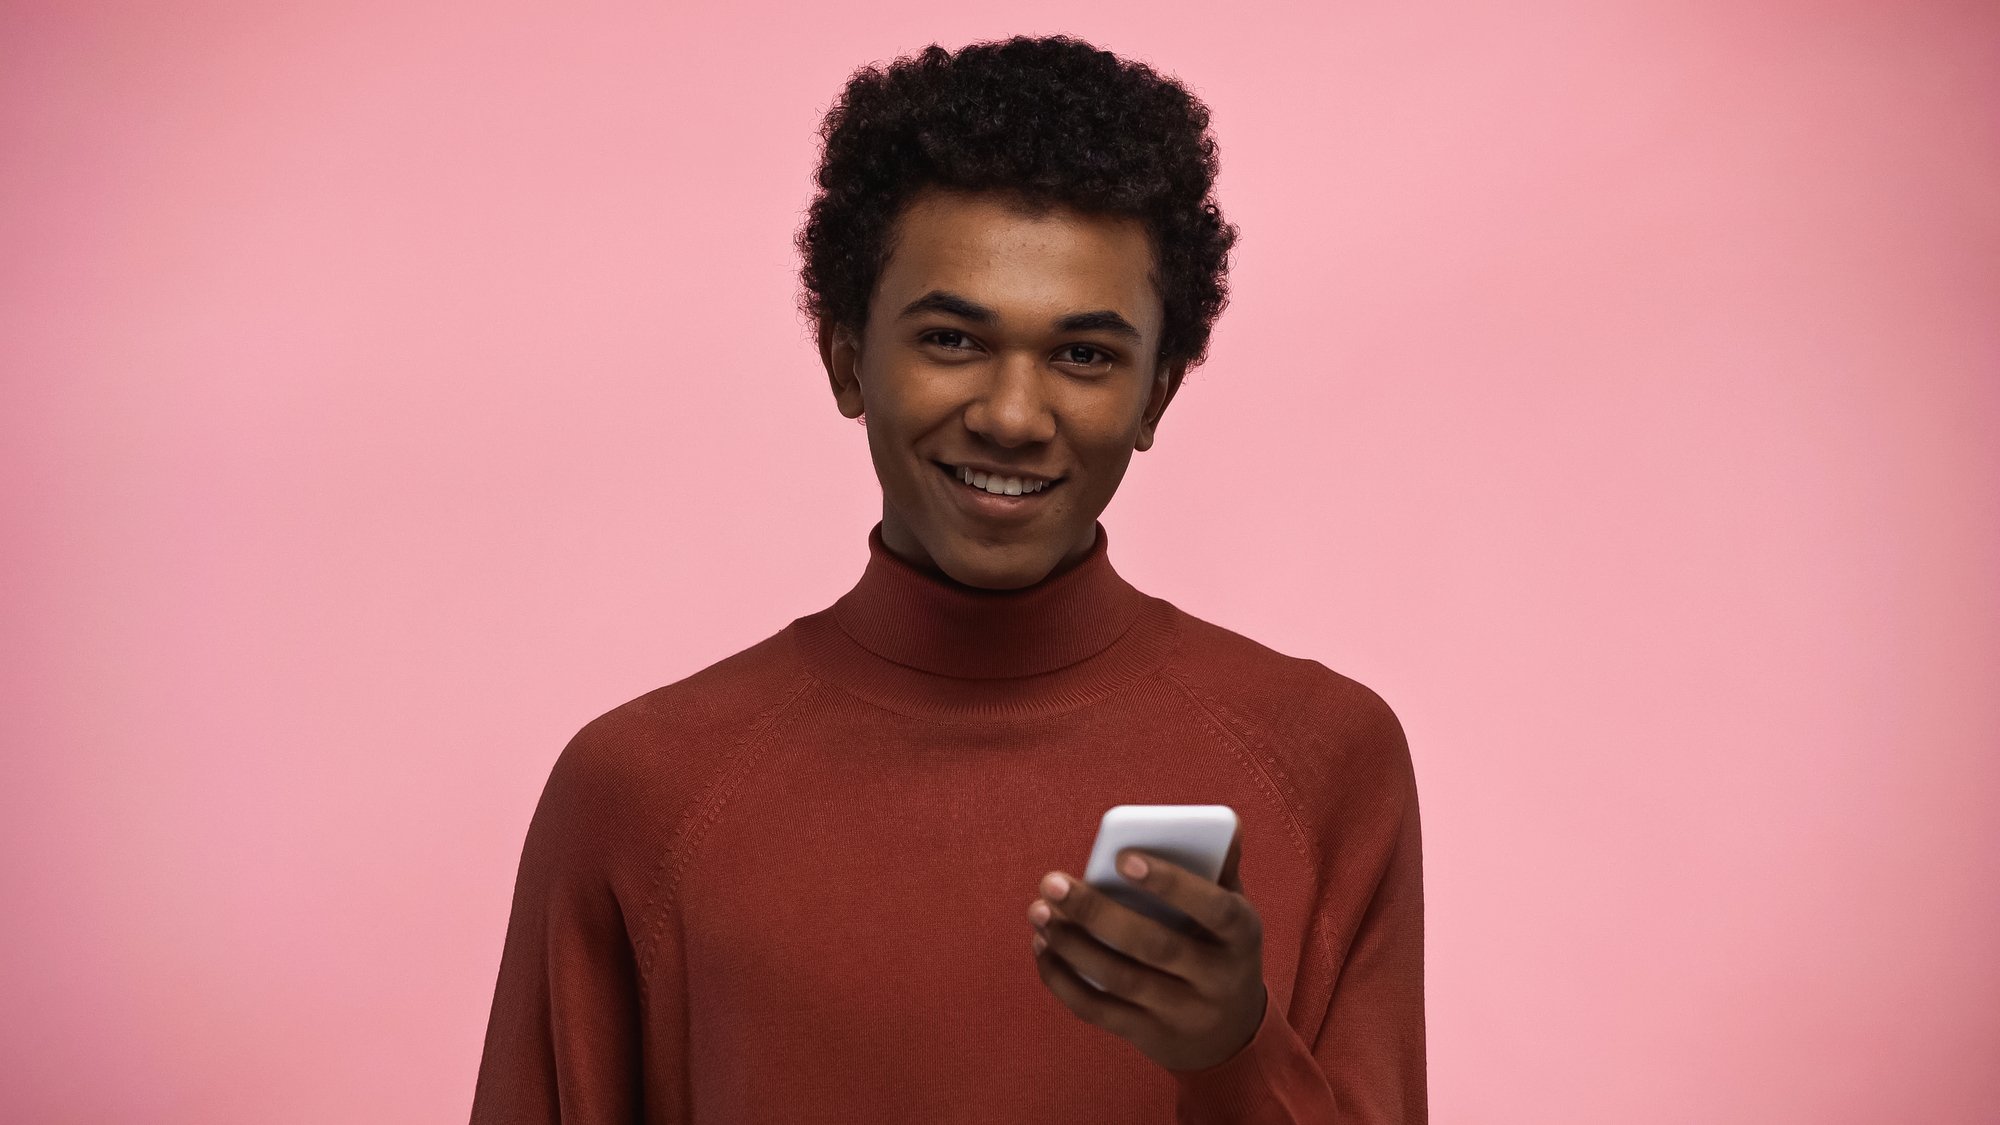 Smiling african american teenager in turtleneck sweater and glasses looking at camera while holding smartphone isolated on pink